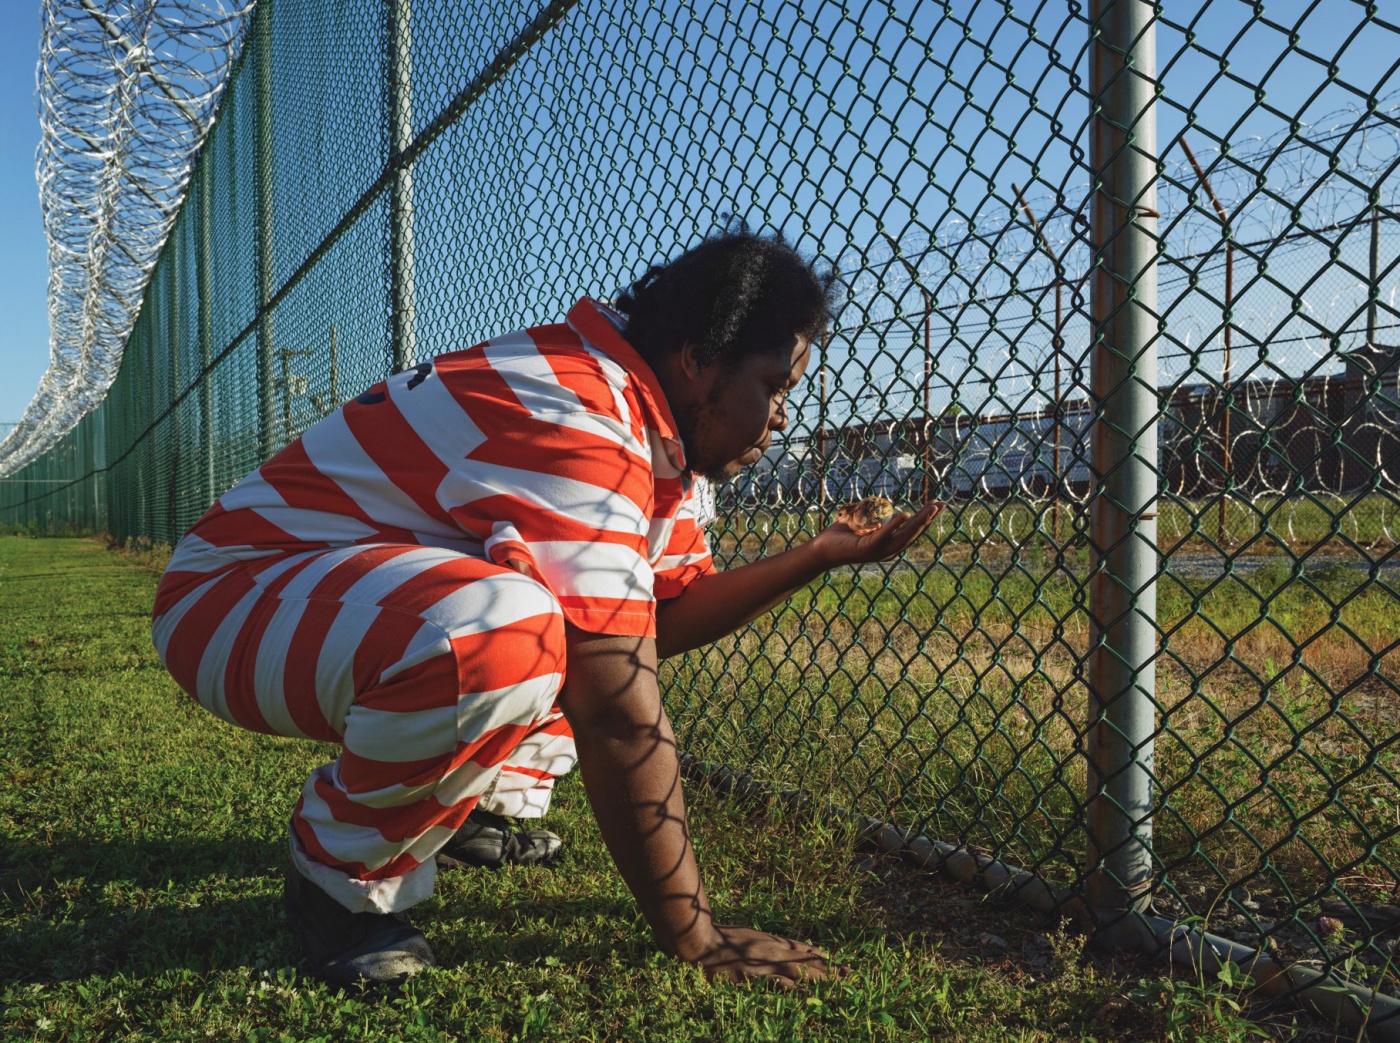 A man wearing a prison uniform squats by a fence, holding a chick in his hand.